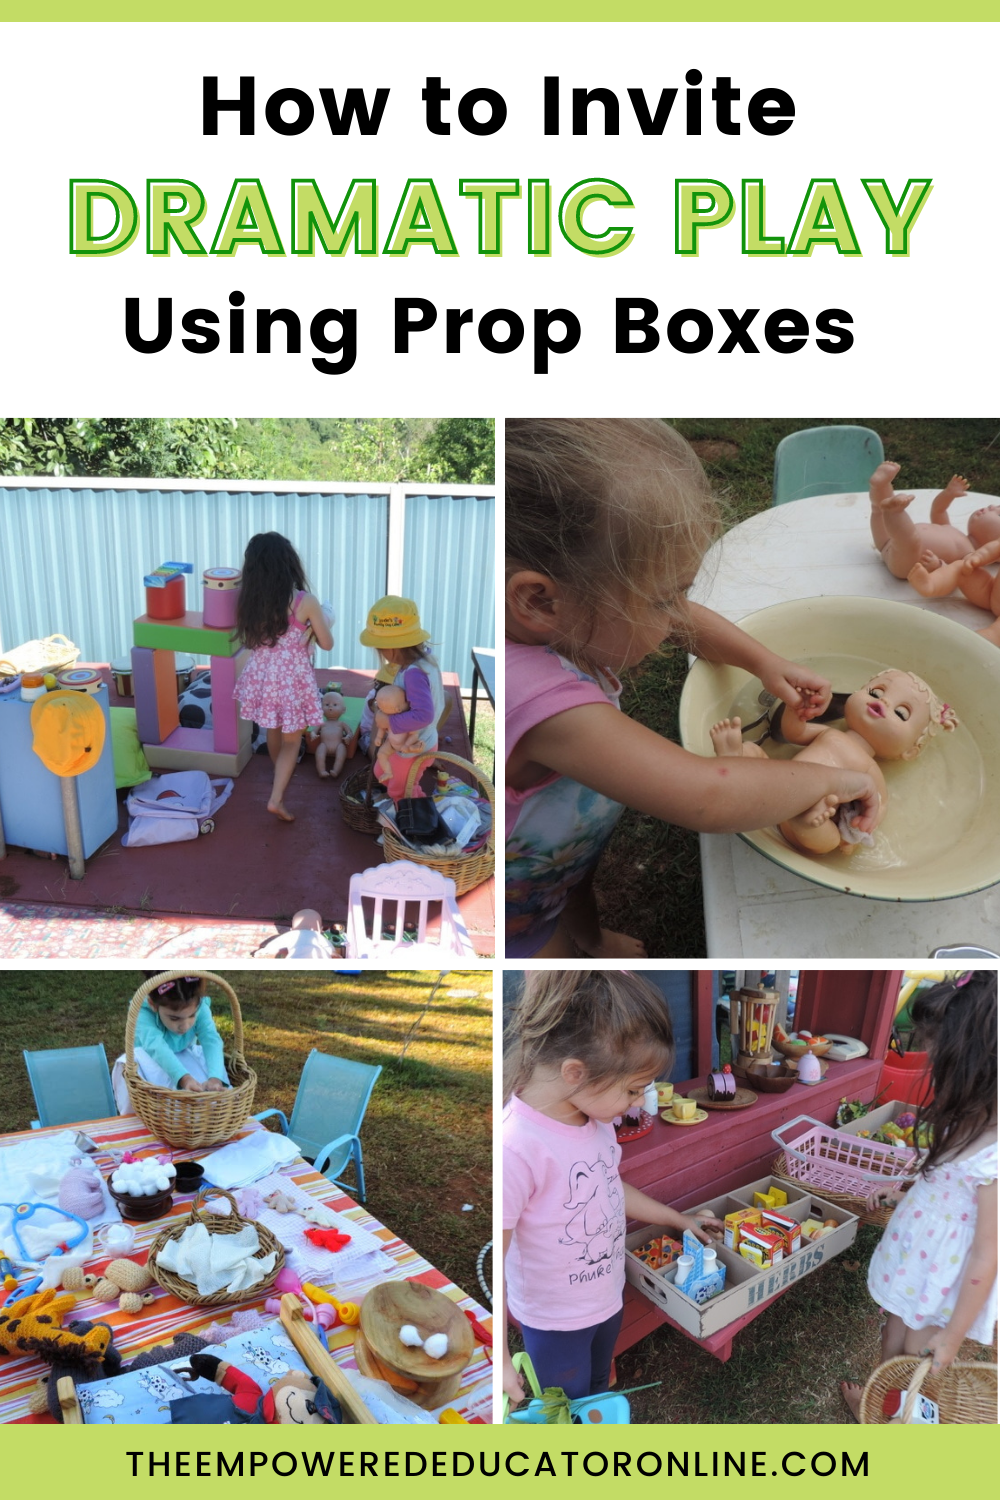 How to invite dramatic play using prop boxes